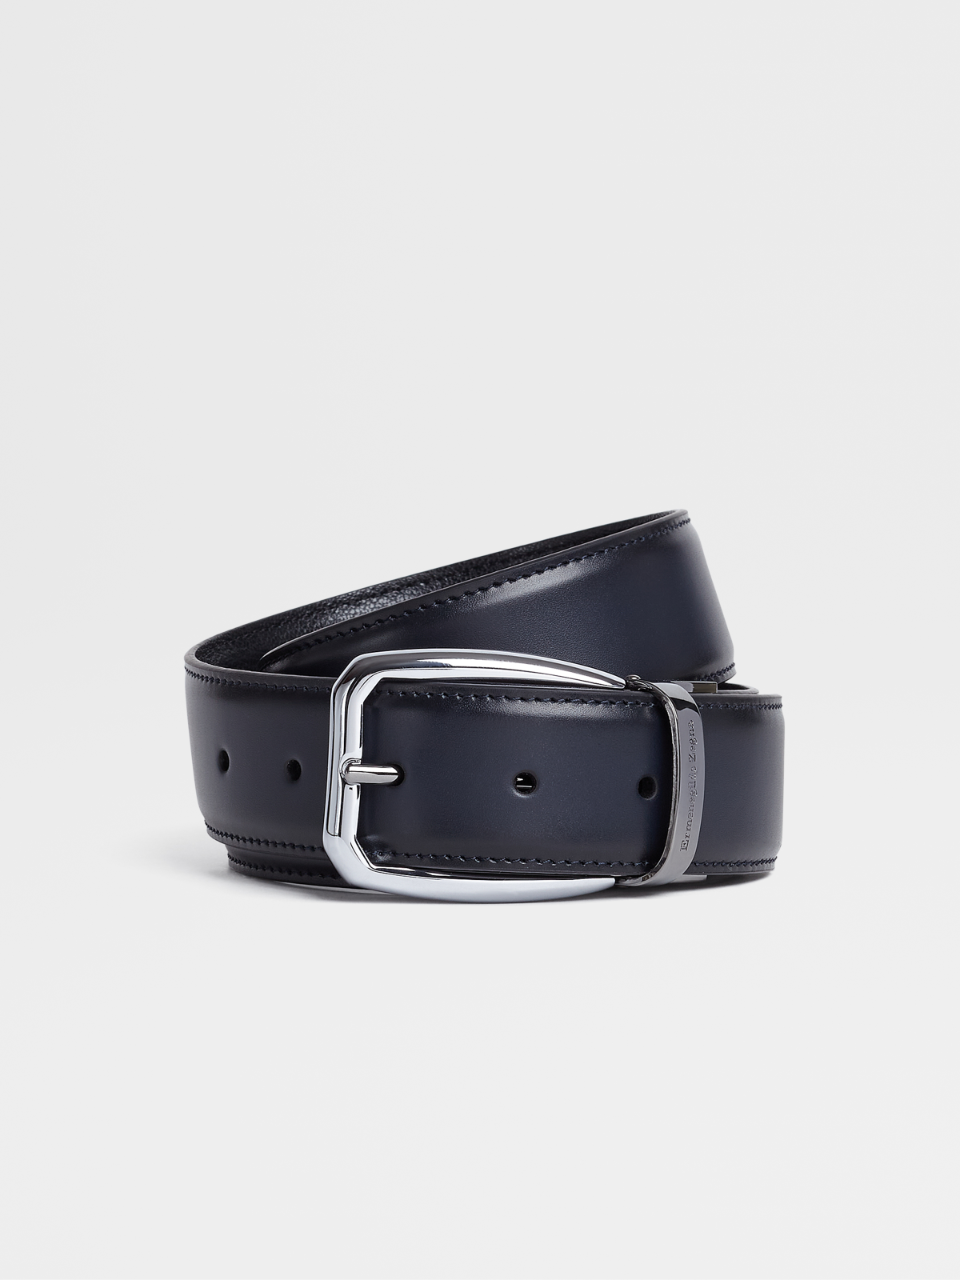 Blue Hand-buffed Leather and Black Slightly Grained Leather Reversible Belt